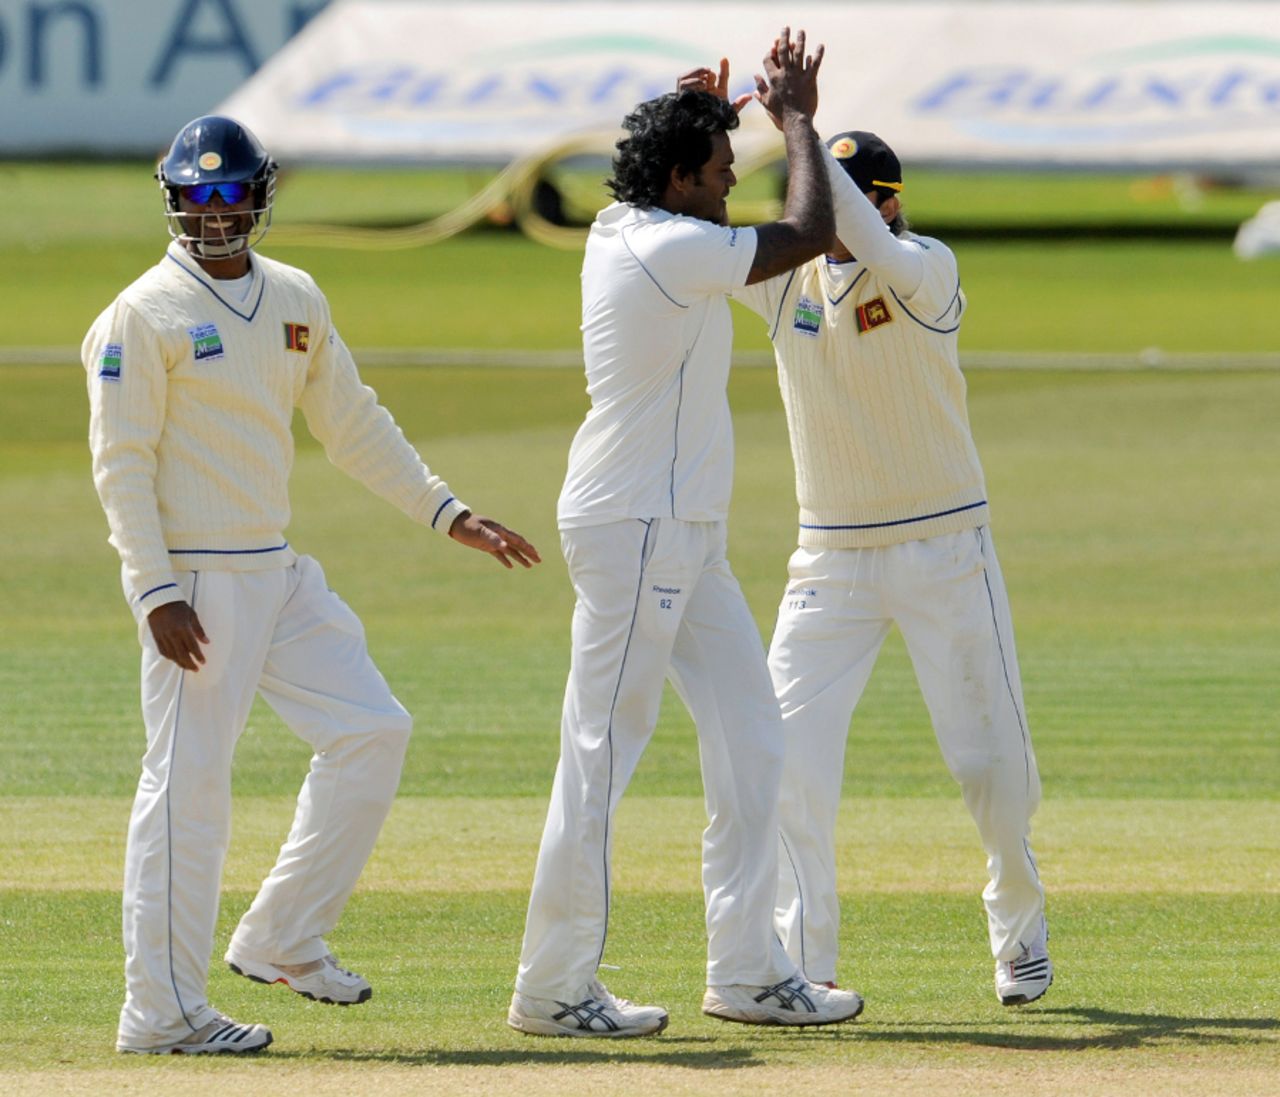 Dilhara Fernando took three wickets in the second innings to help set up Sri Lanka's win over England Lions, England Lions v Sri Lanka, Tour Match, Derby, May 22 2011